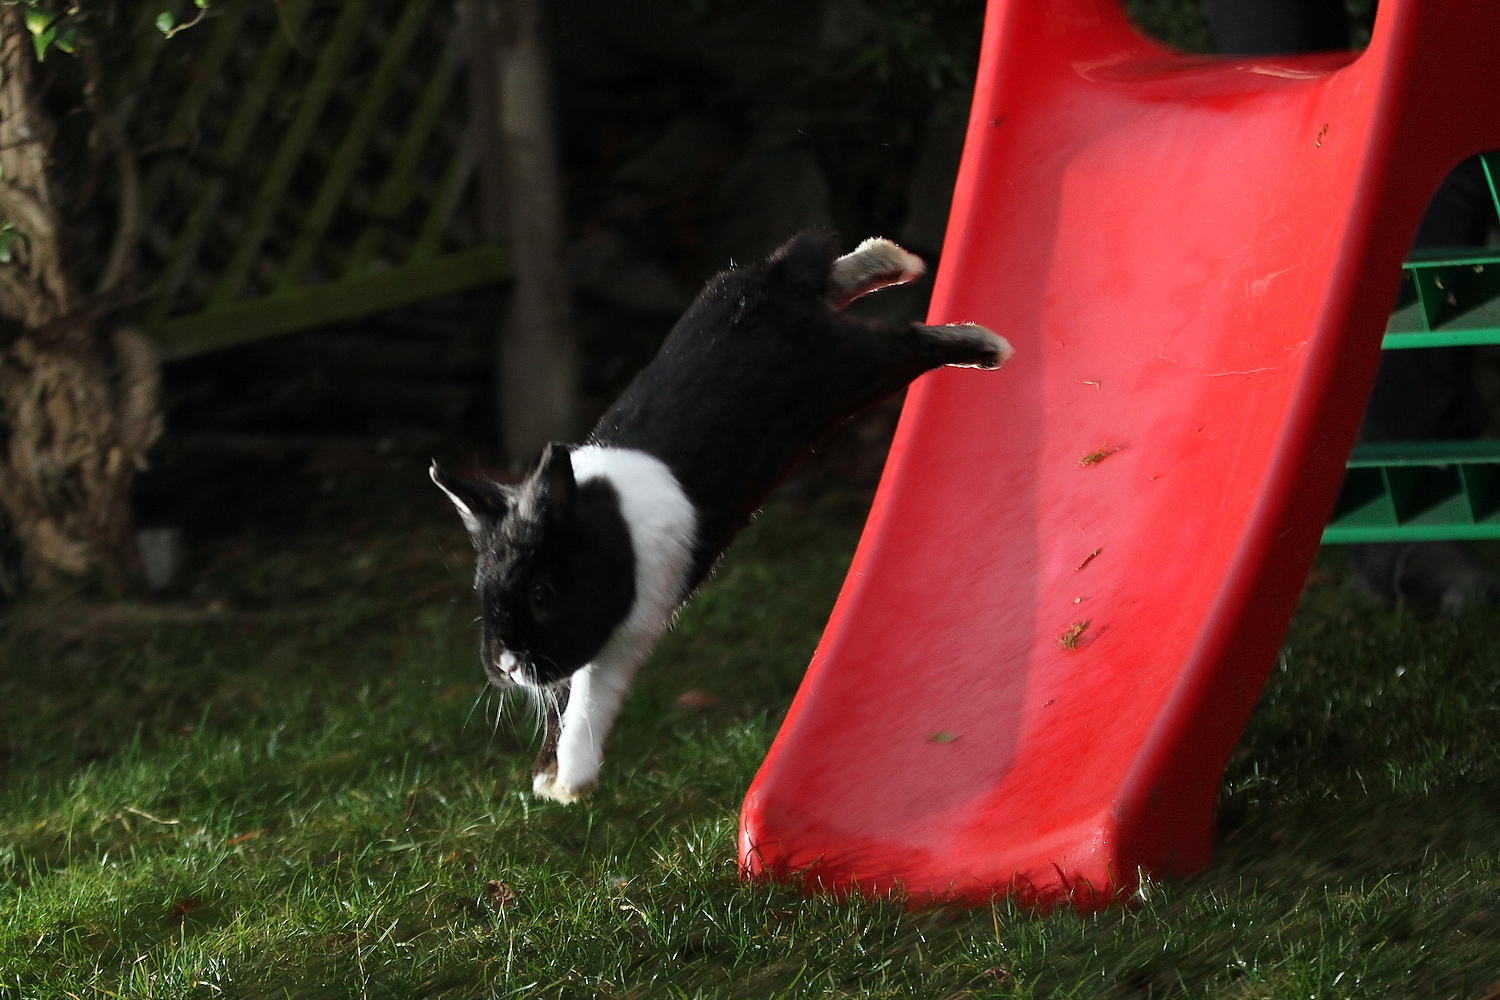 Bunny Takes a Flying Leap Off the Slide